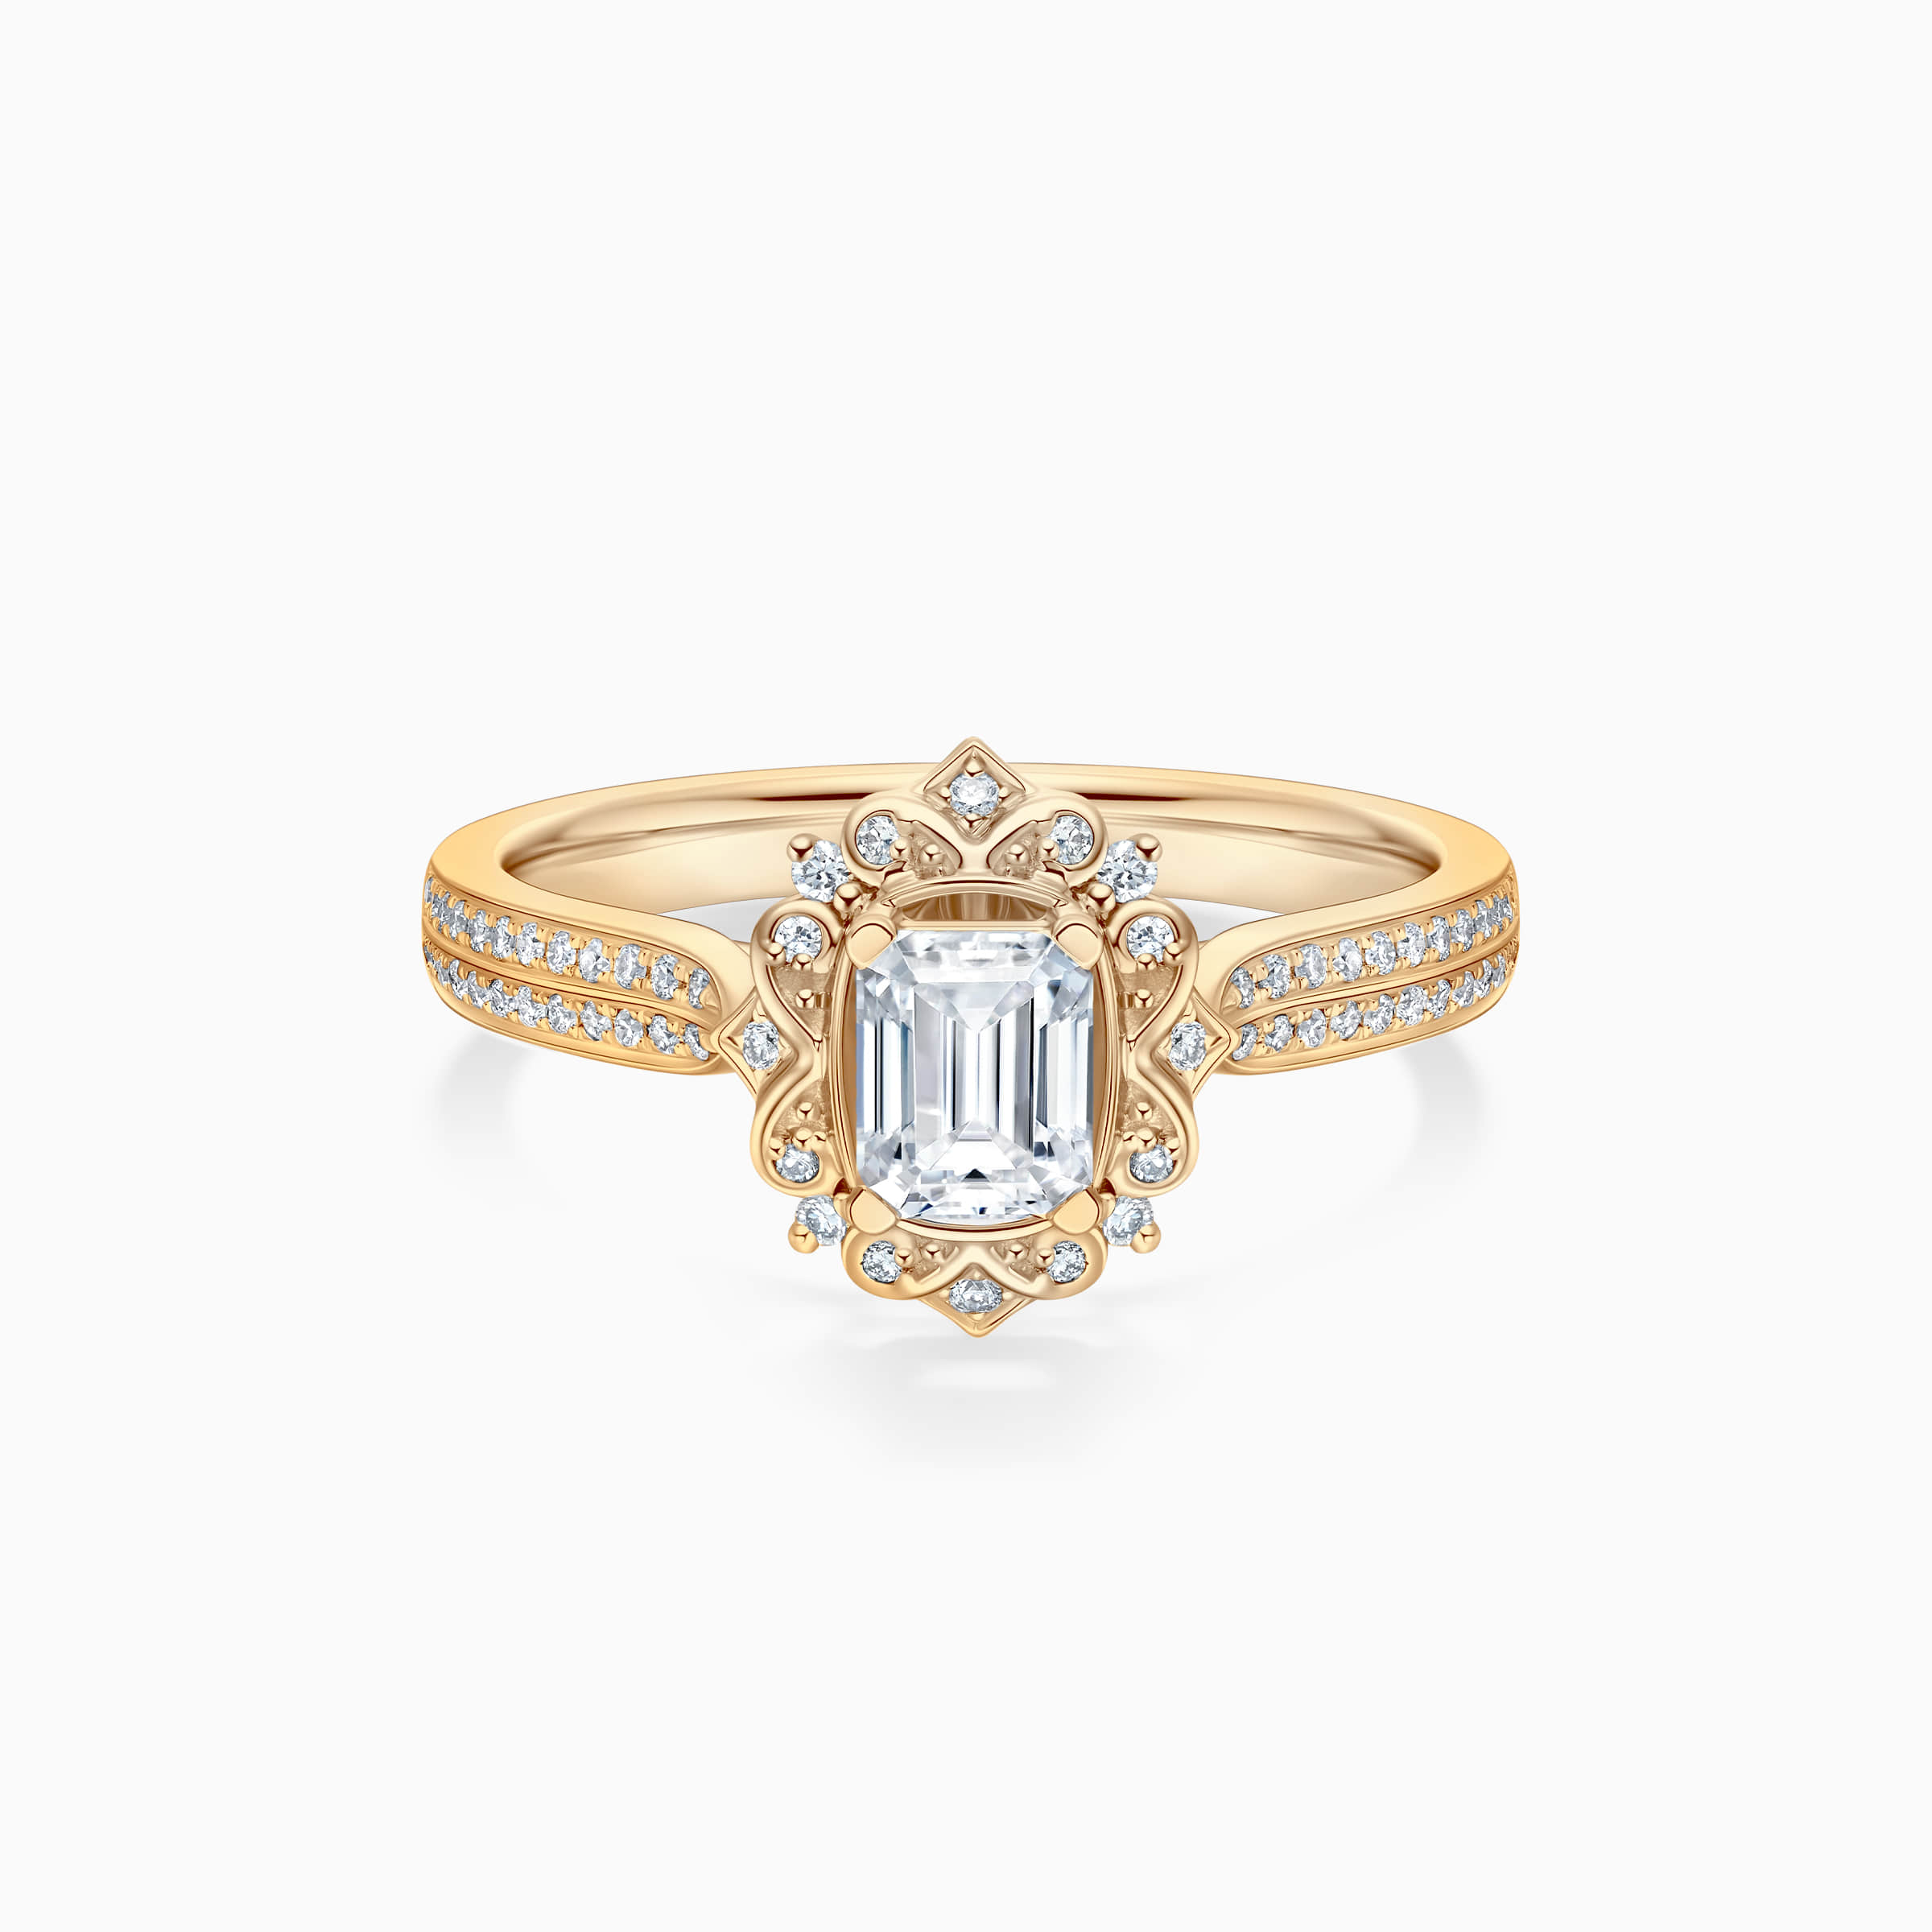 Darry Ring vintage emerald cut engagement ring in yellow gold